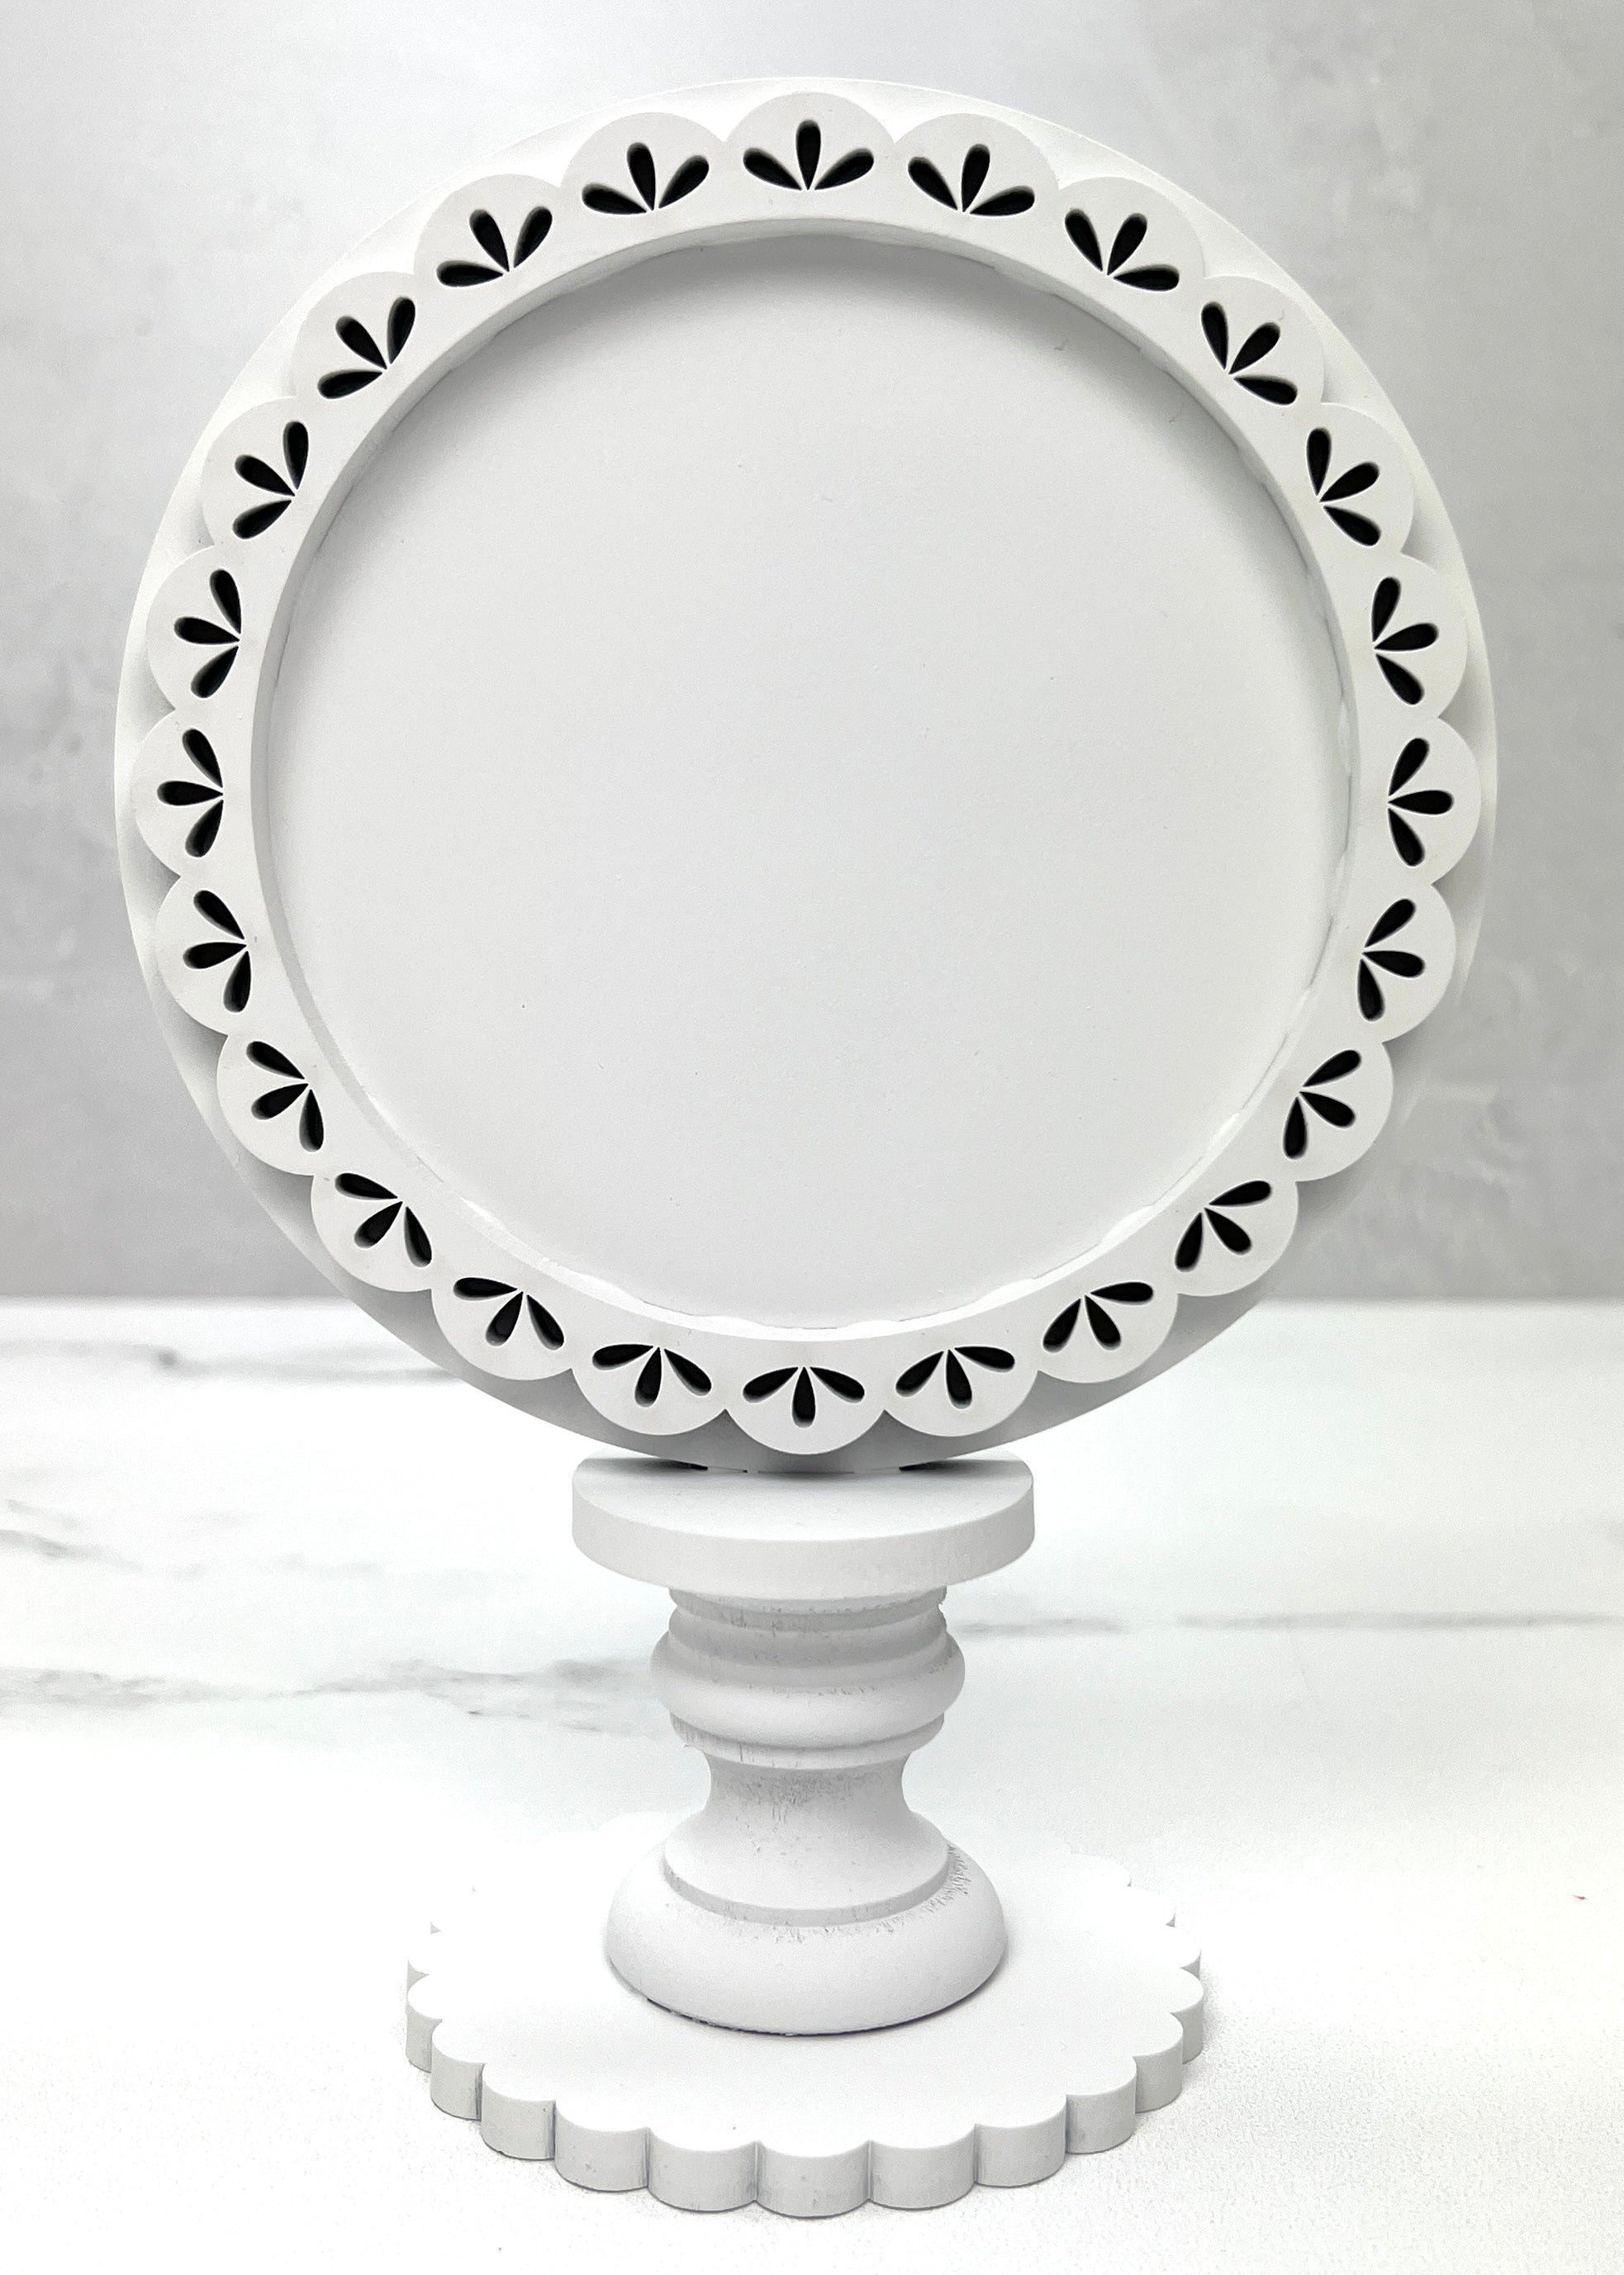 Round decorative frame on a pedestal for displaying finished cross stitch pieces. 